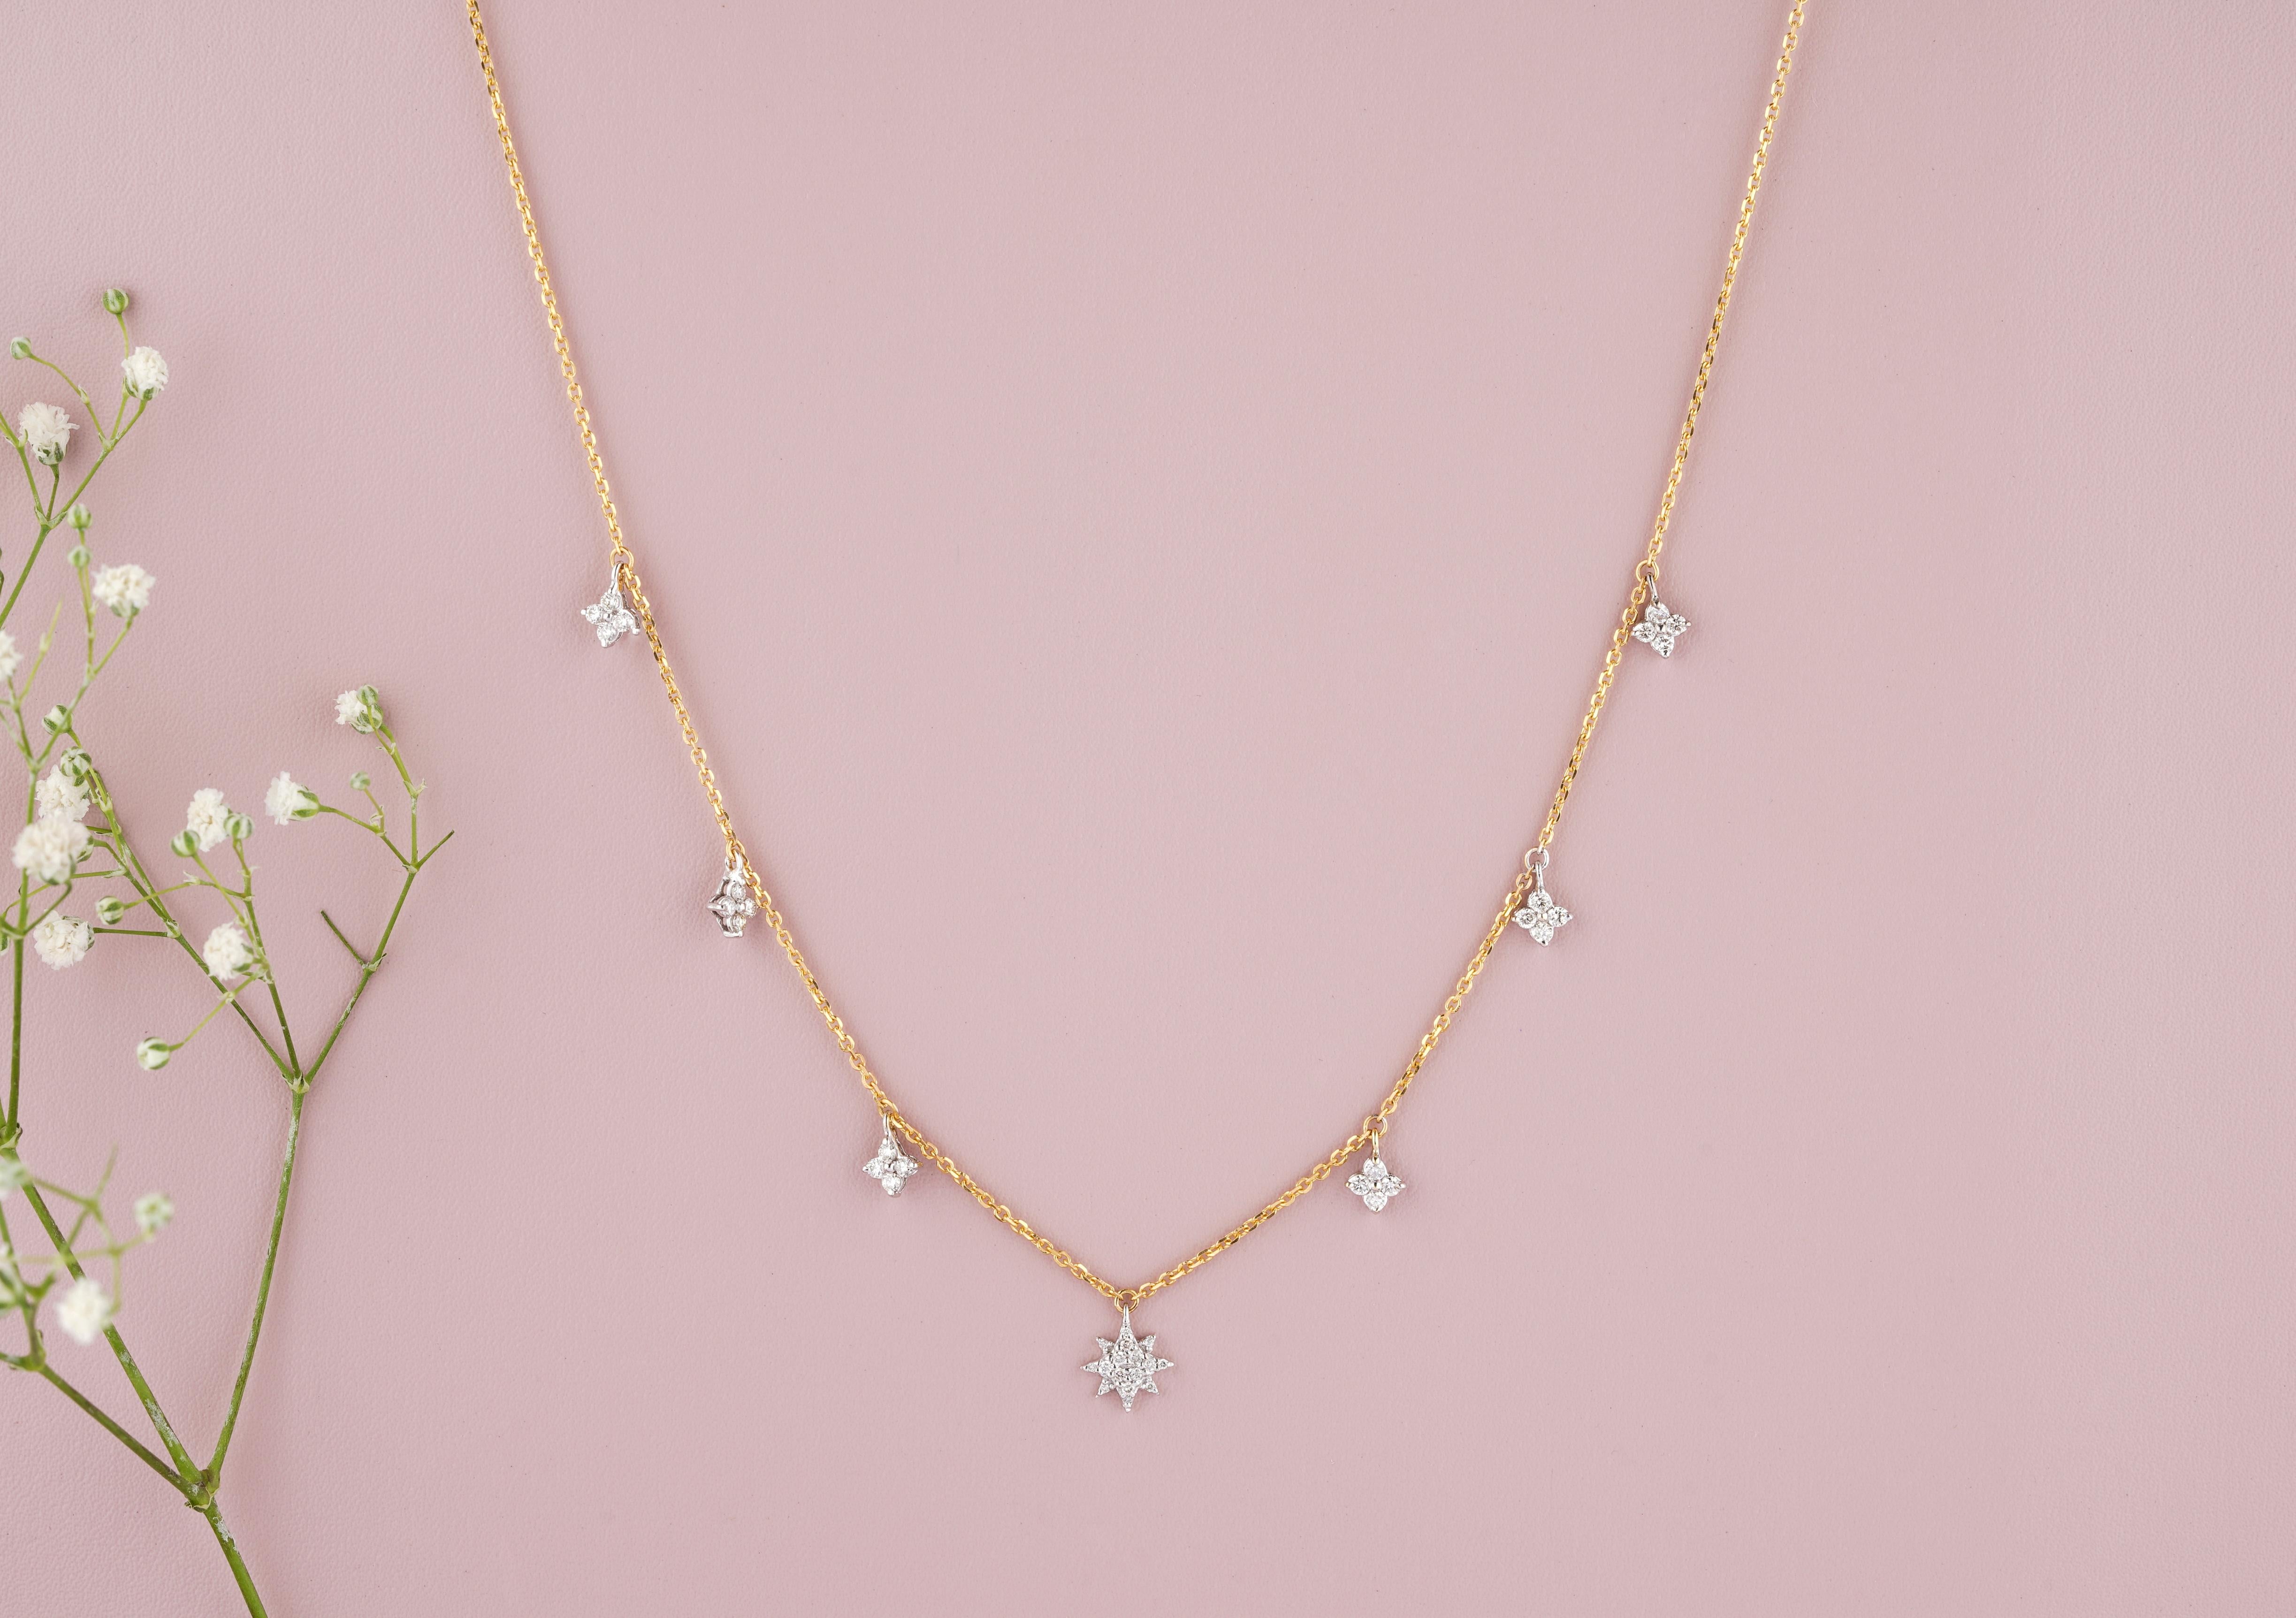 This Dangling Diamond Stars Charm Necklace in 18k Solid Gold is an elegant and stylish piece of jewelry. Crafted in solid 18k gold, this necklace features delicate star-shaped charms adorned with shimmering diamonds. The stars are designed to dangle